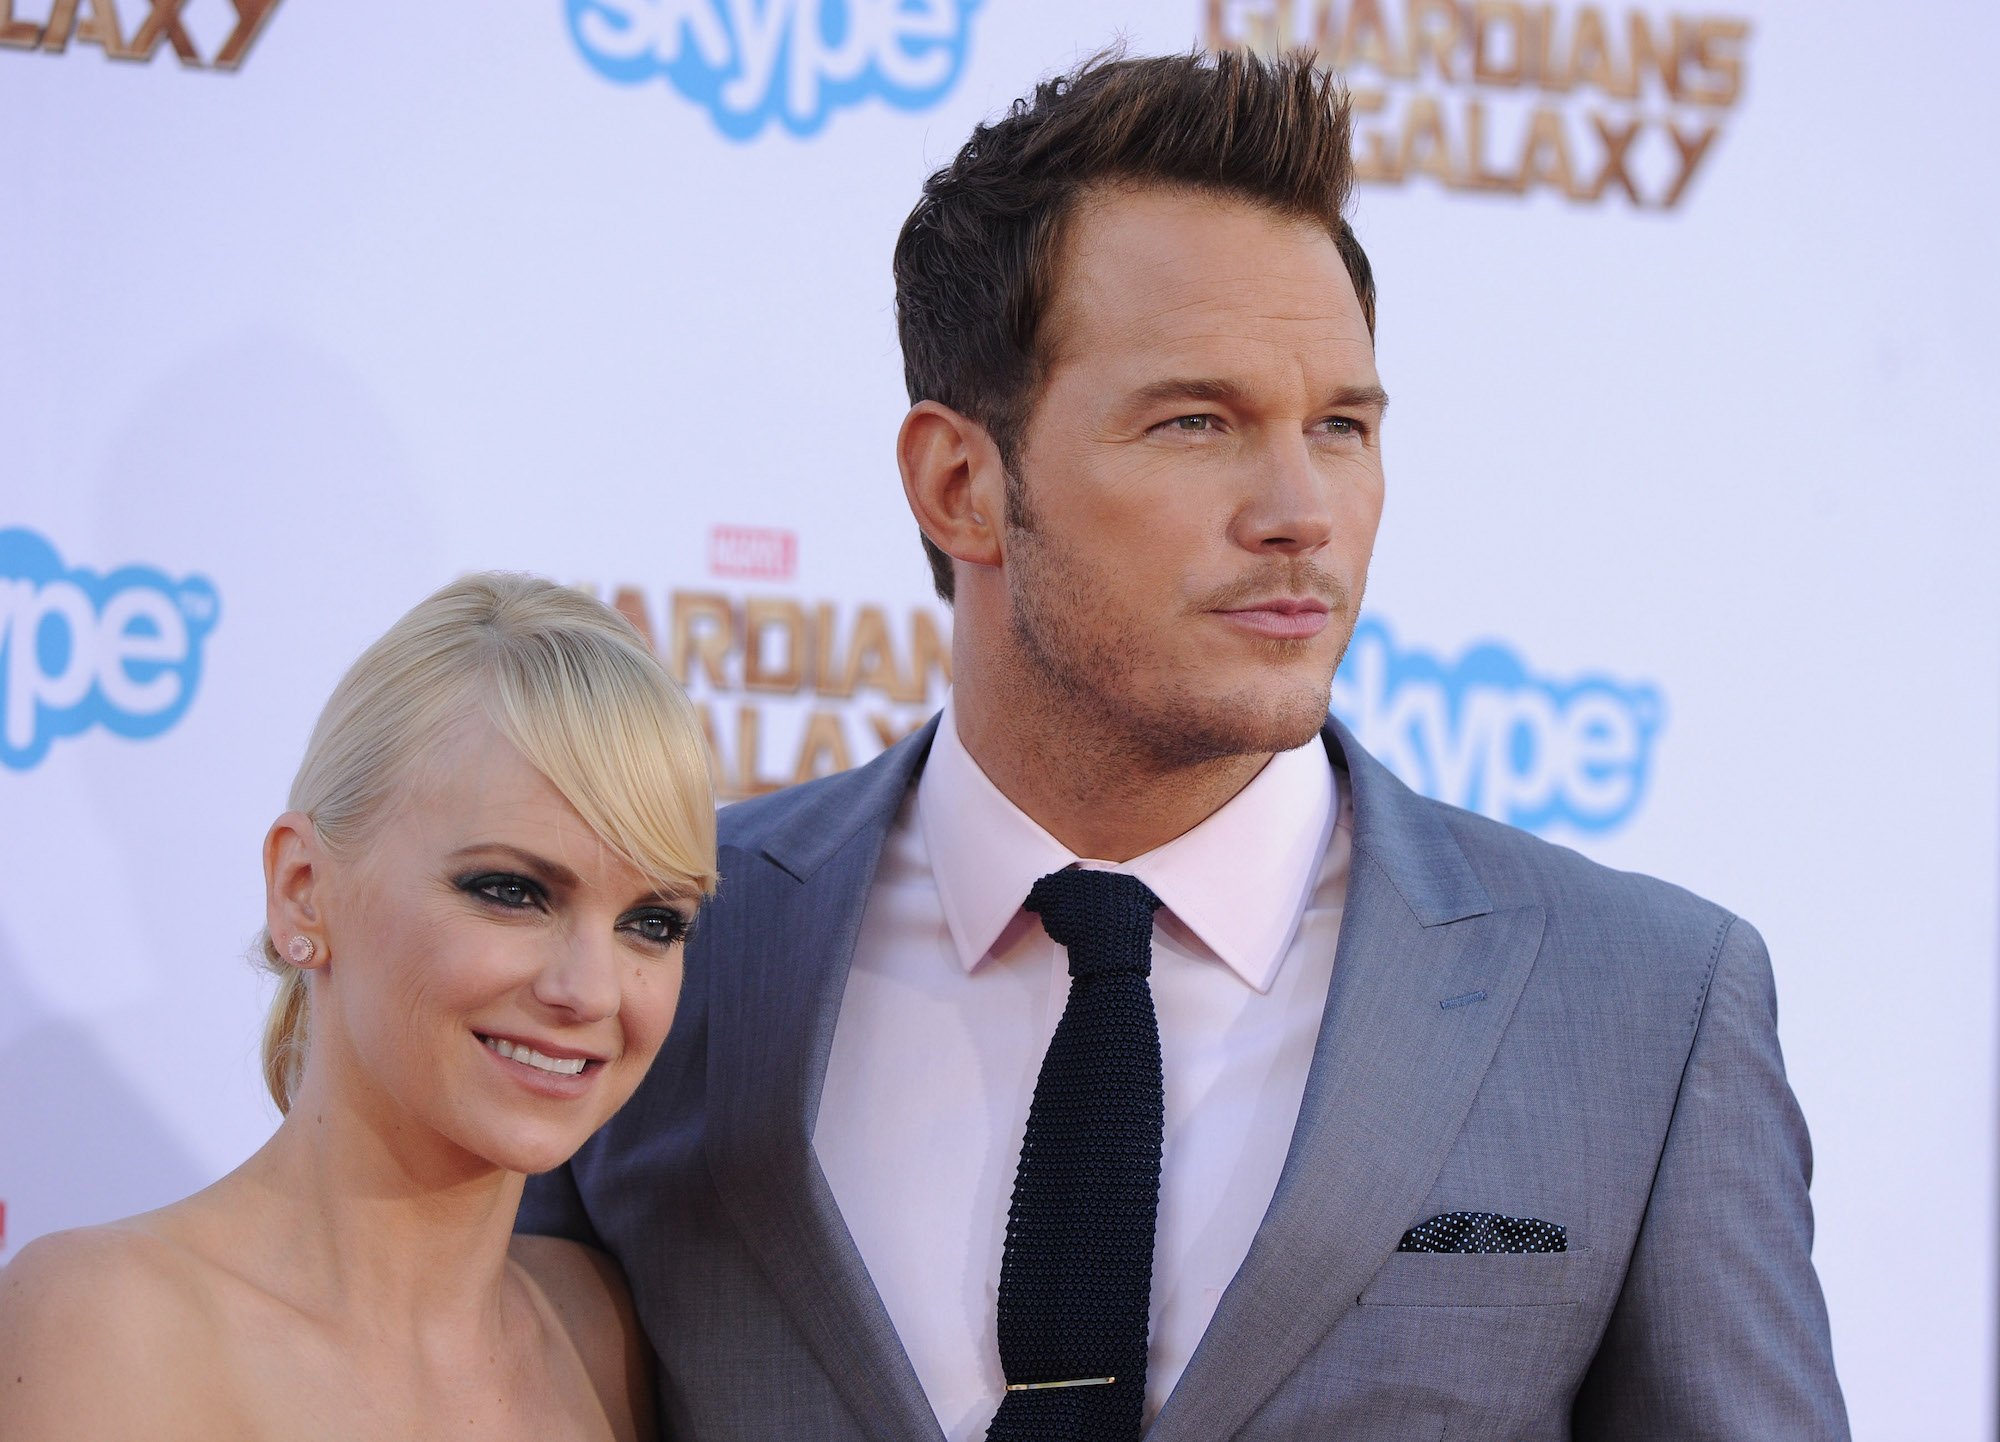 Anna Faris Wanted To Be With Chris Pratt So Badly She Broke Up With Her First Husband Over The Phone